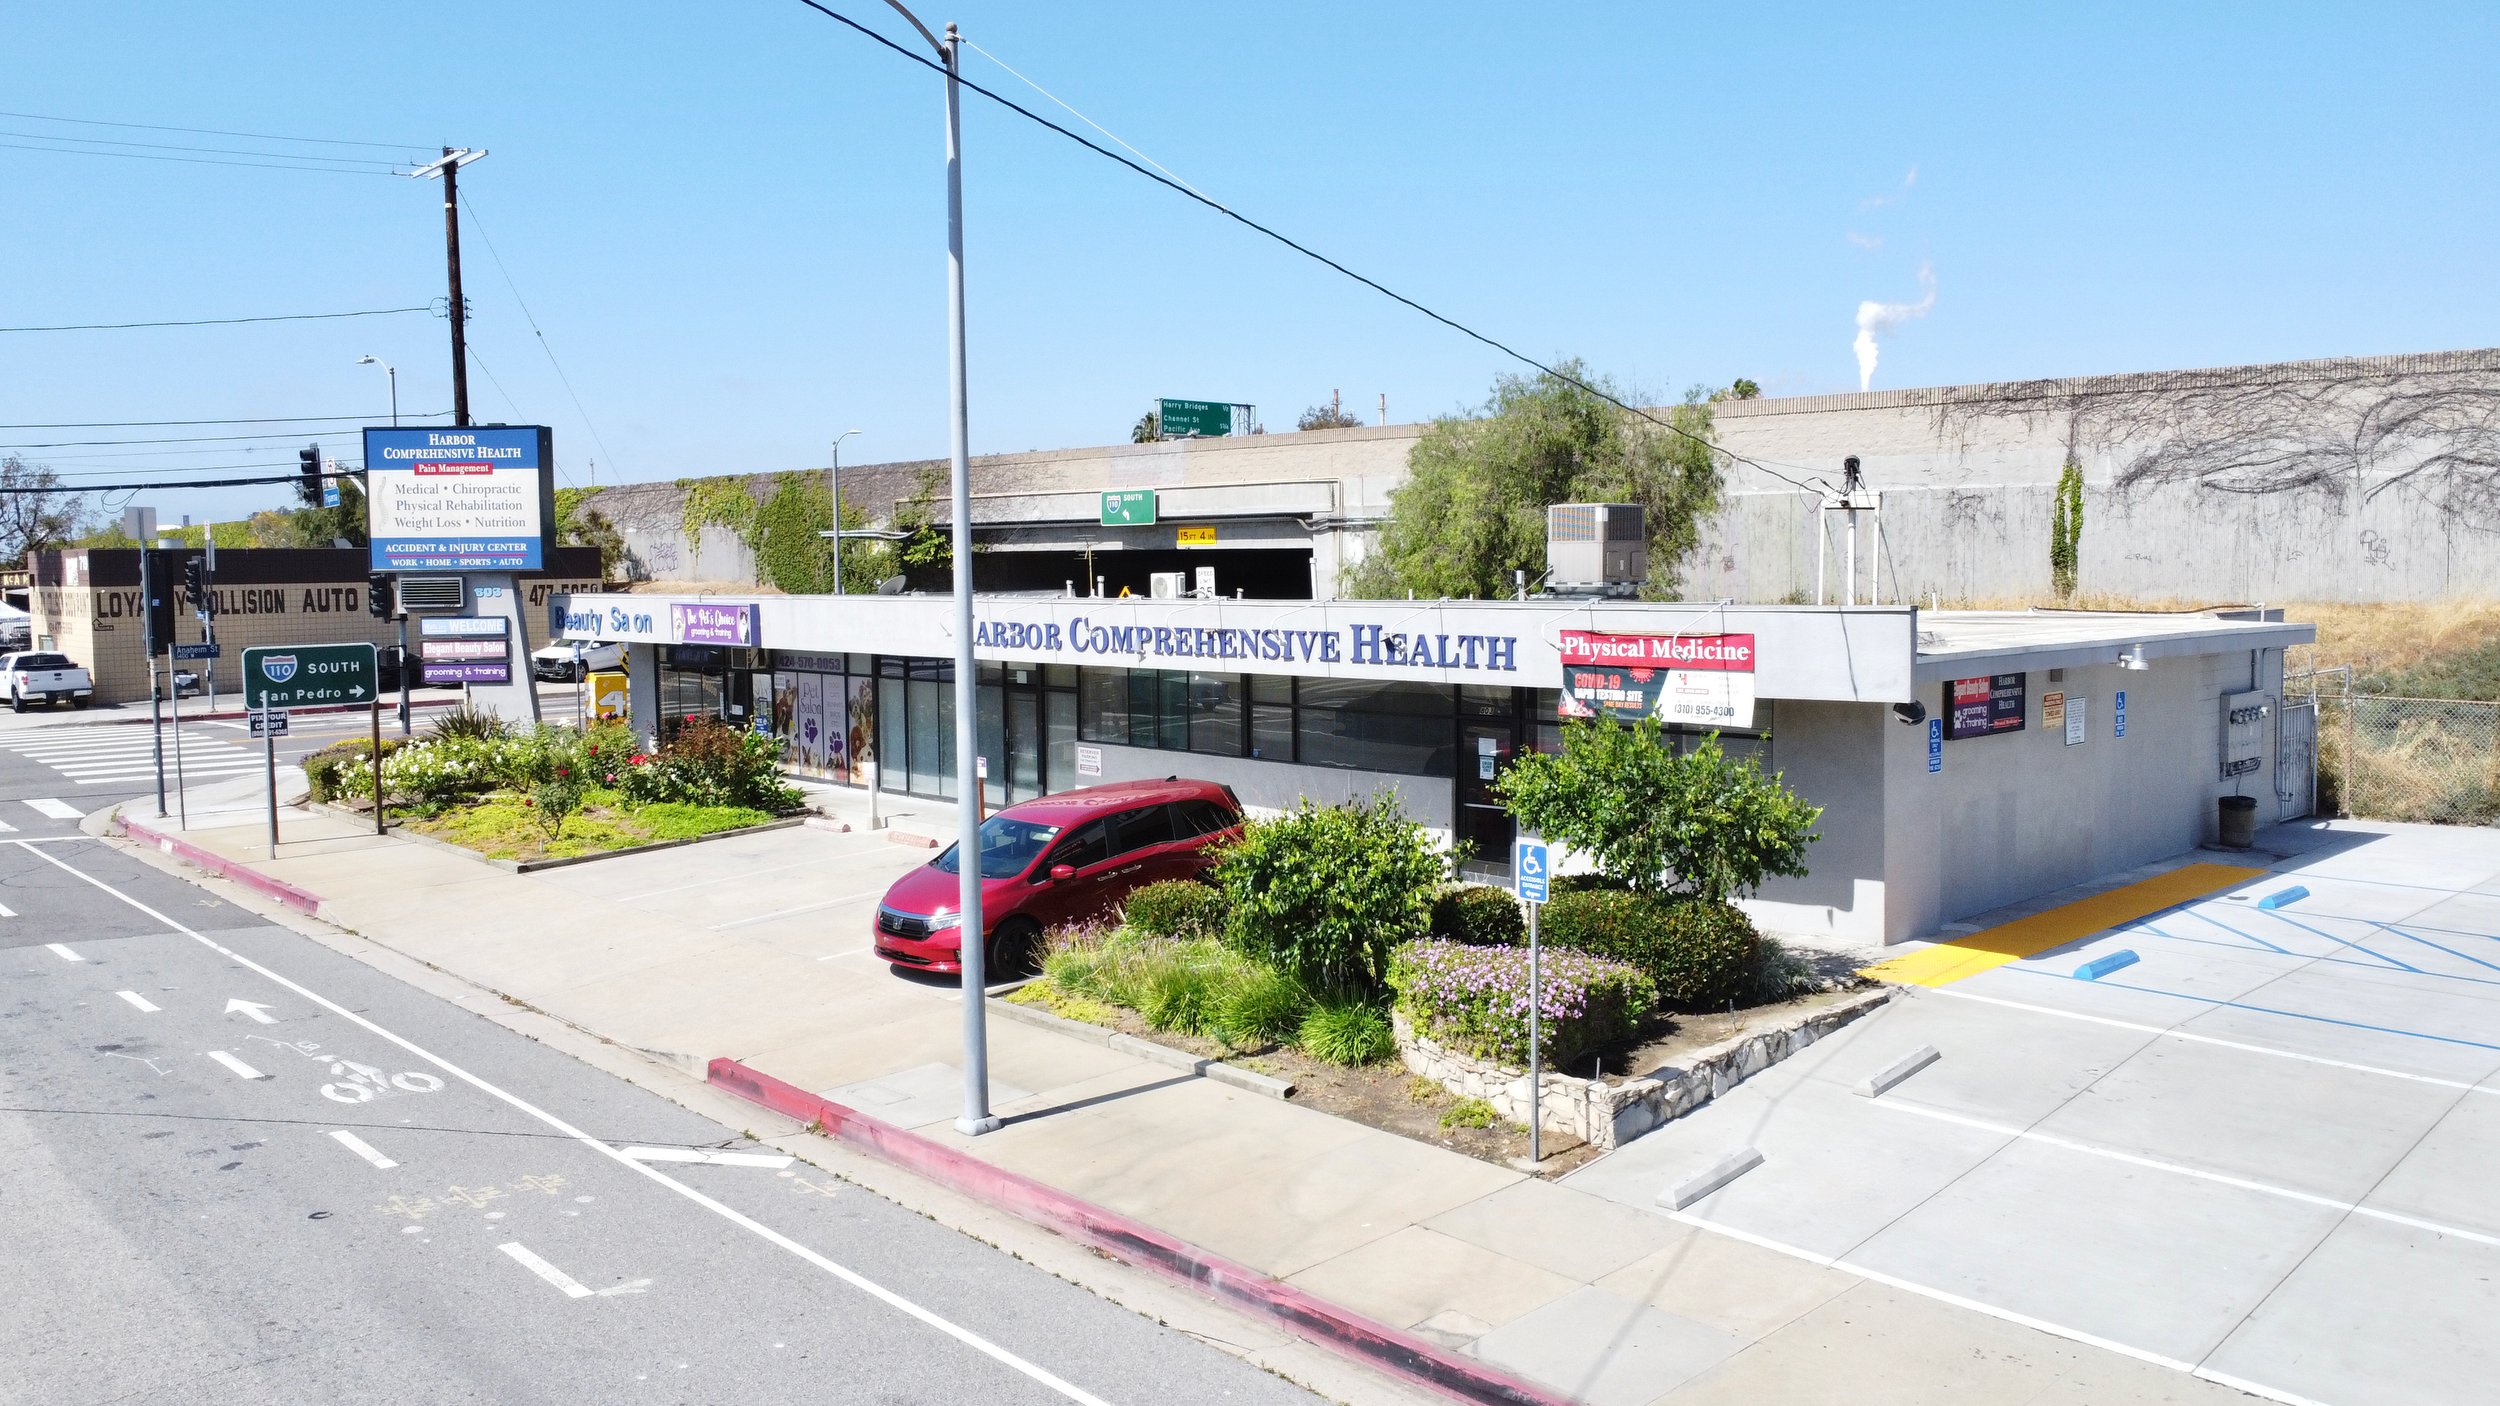 Street view of stripmall with Harbor Comprehensive Health. 